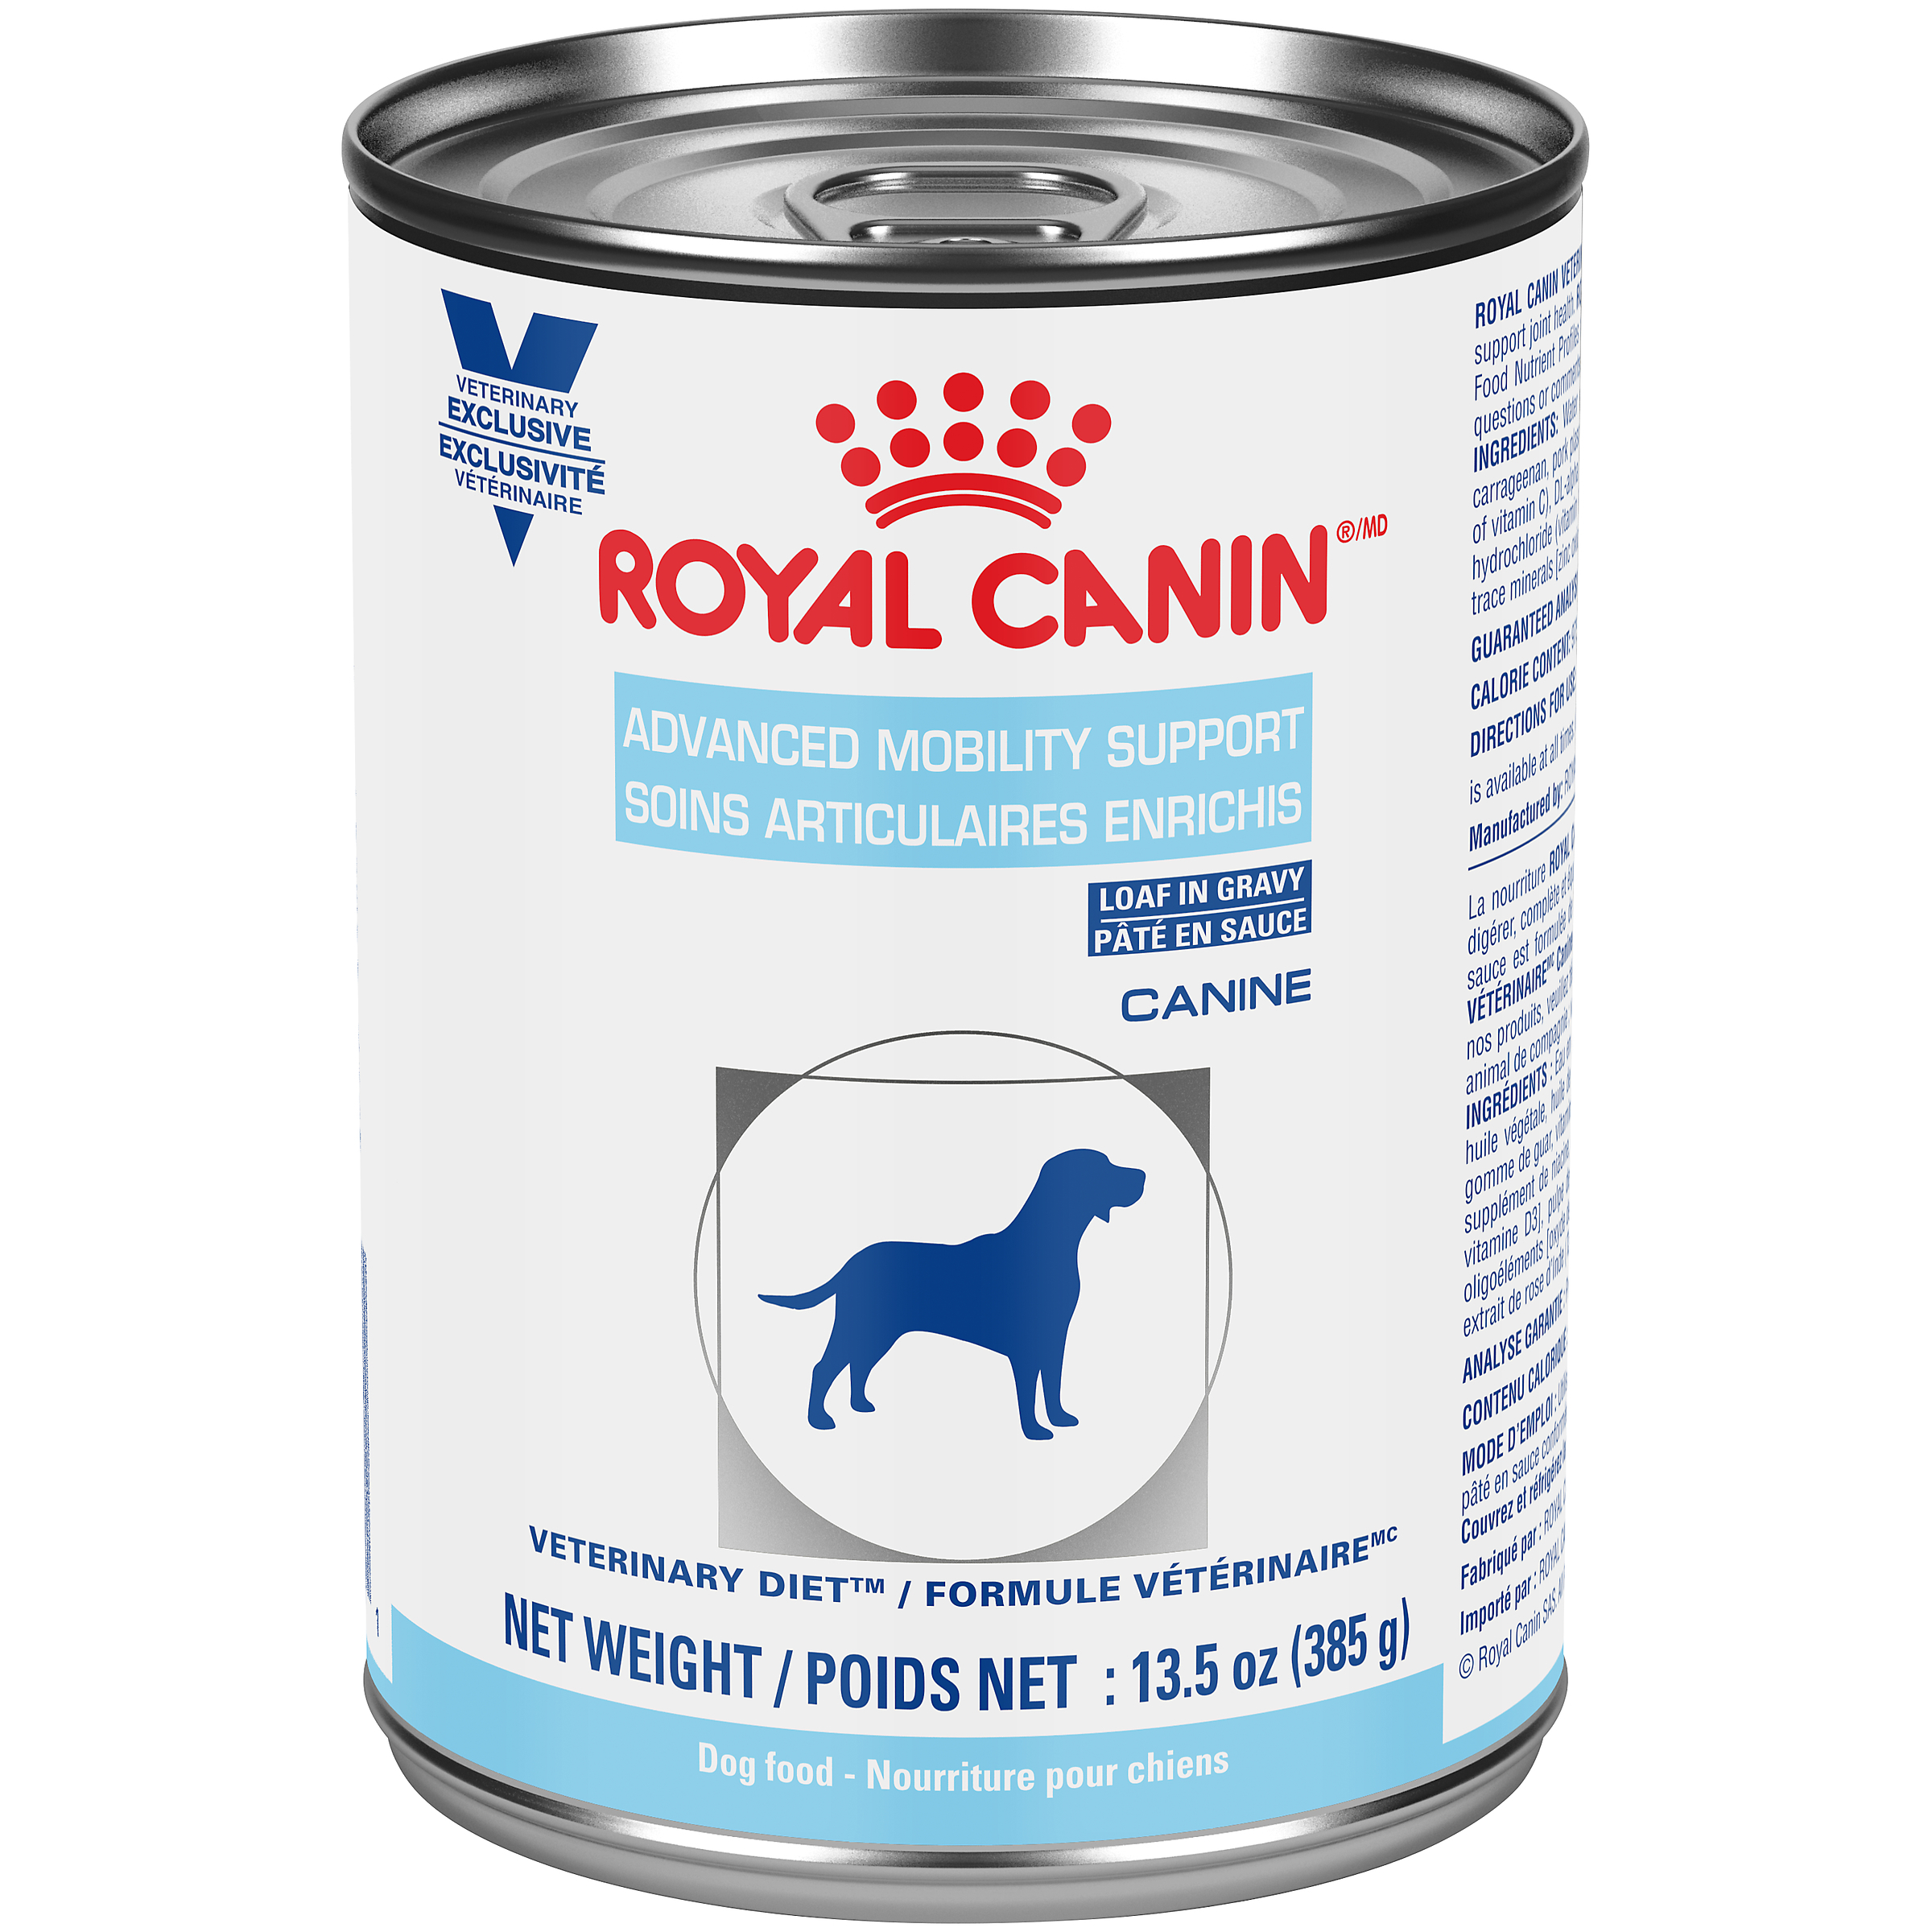 Canine Advanced Mobility Support Canned Dog Food Royal